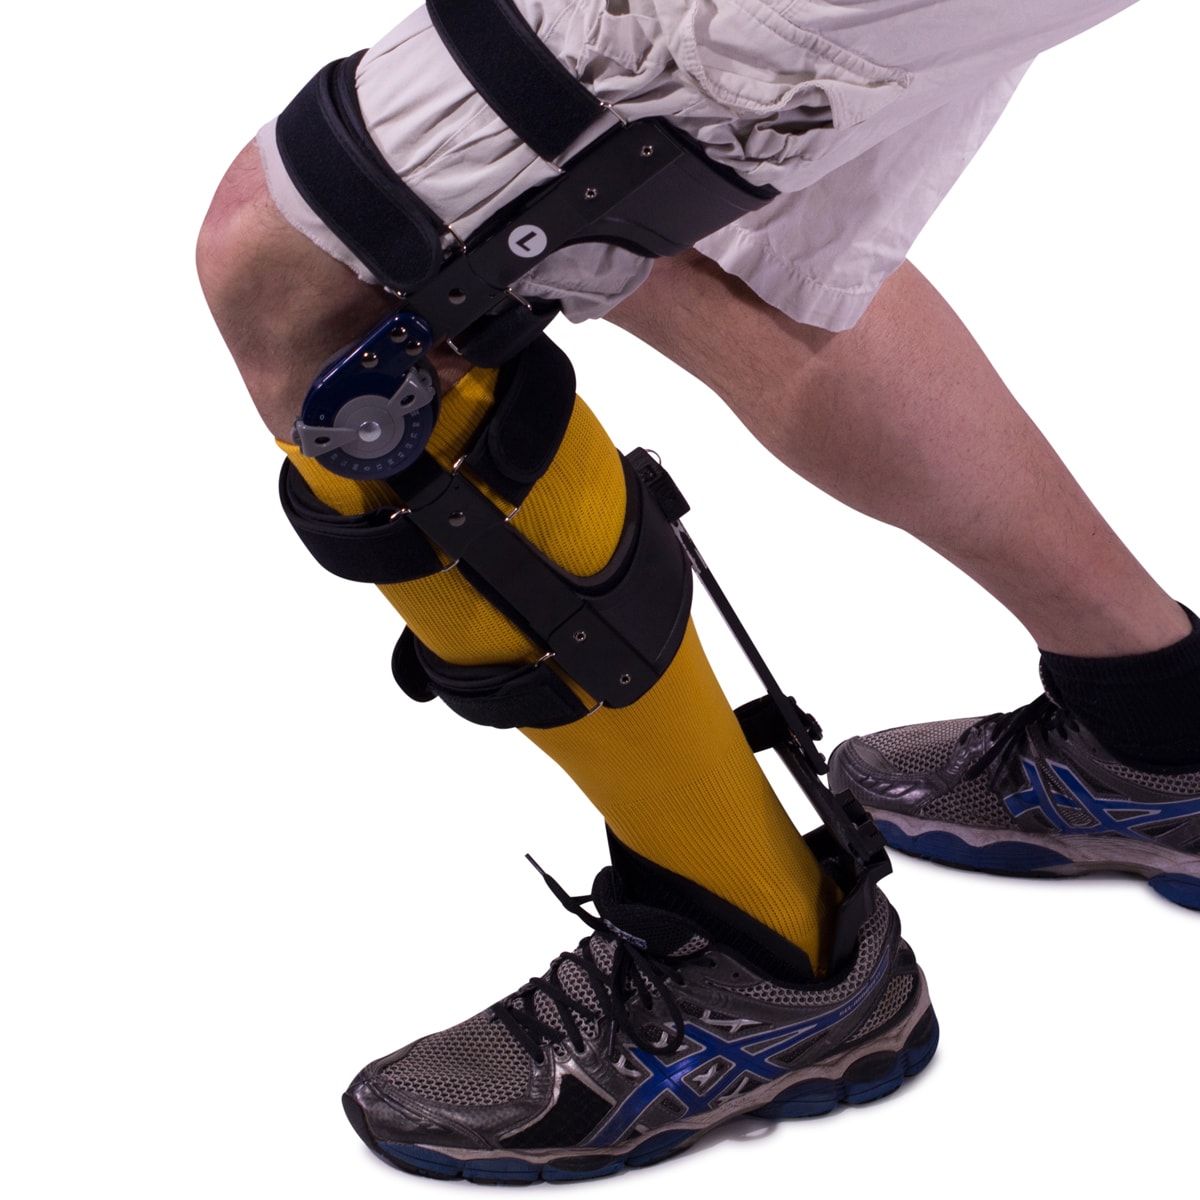 The masted knee brace from Insightful Products, shown with knee bending